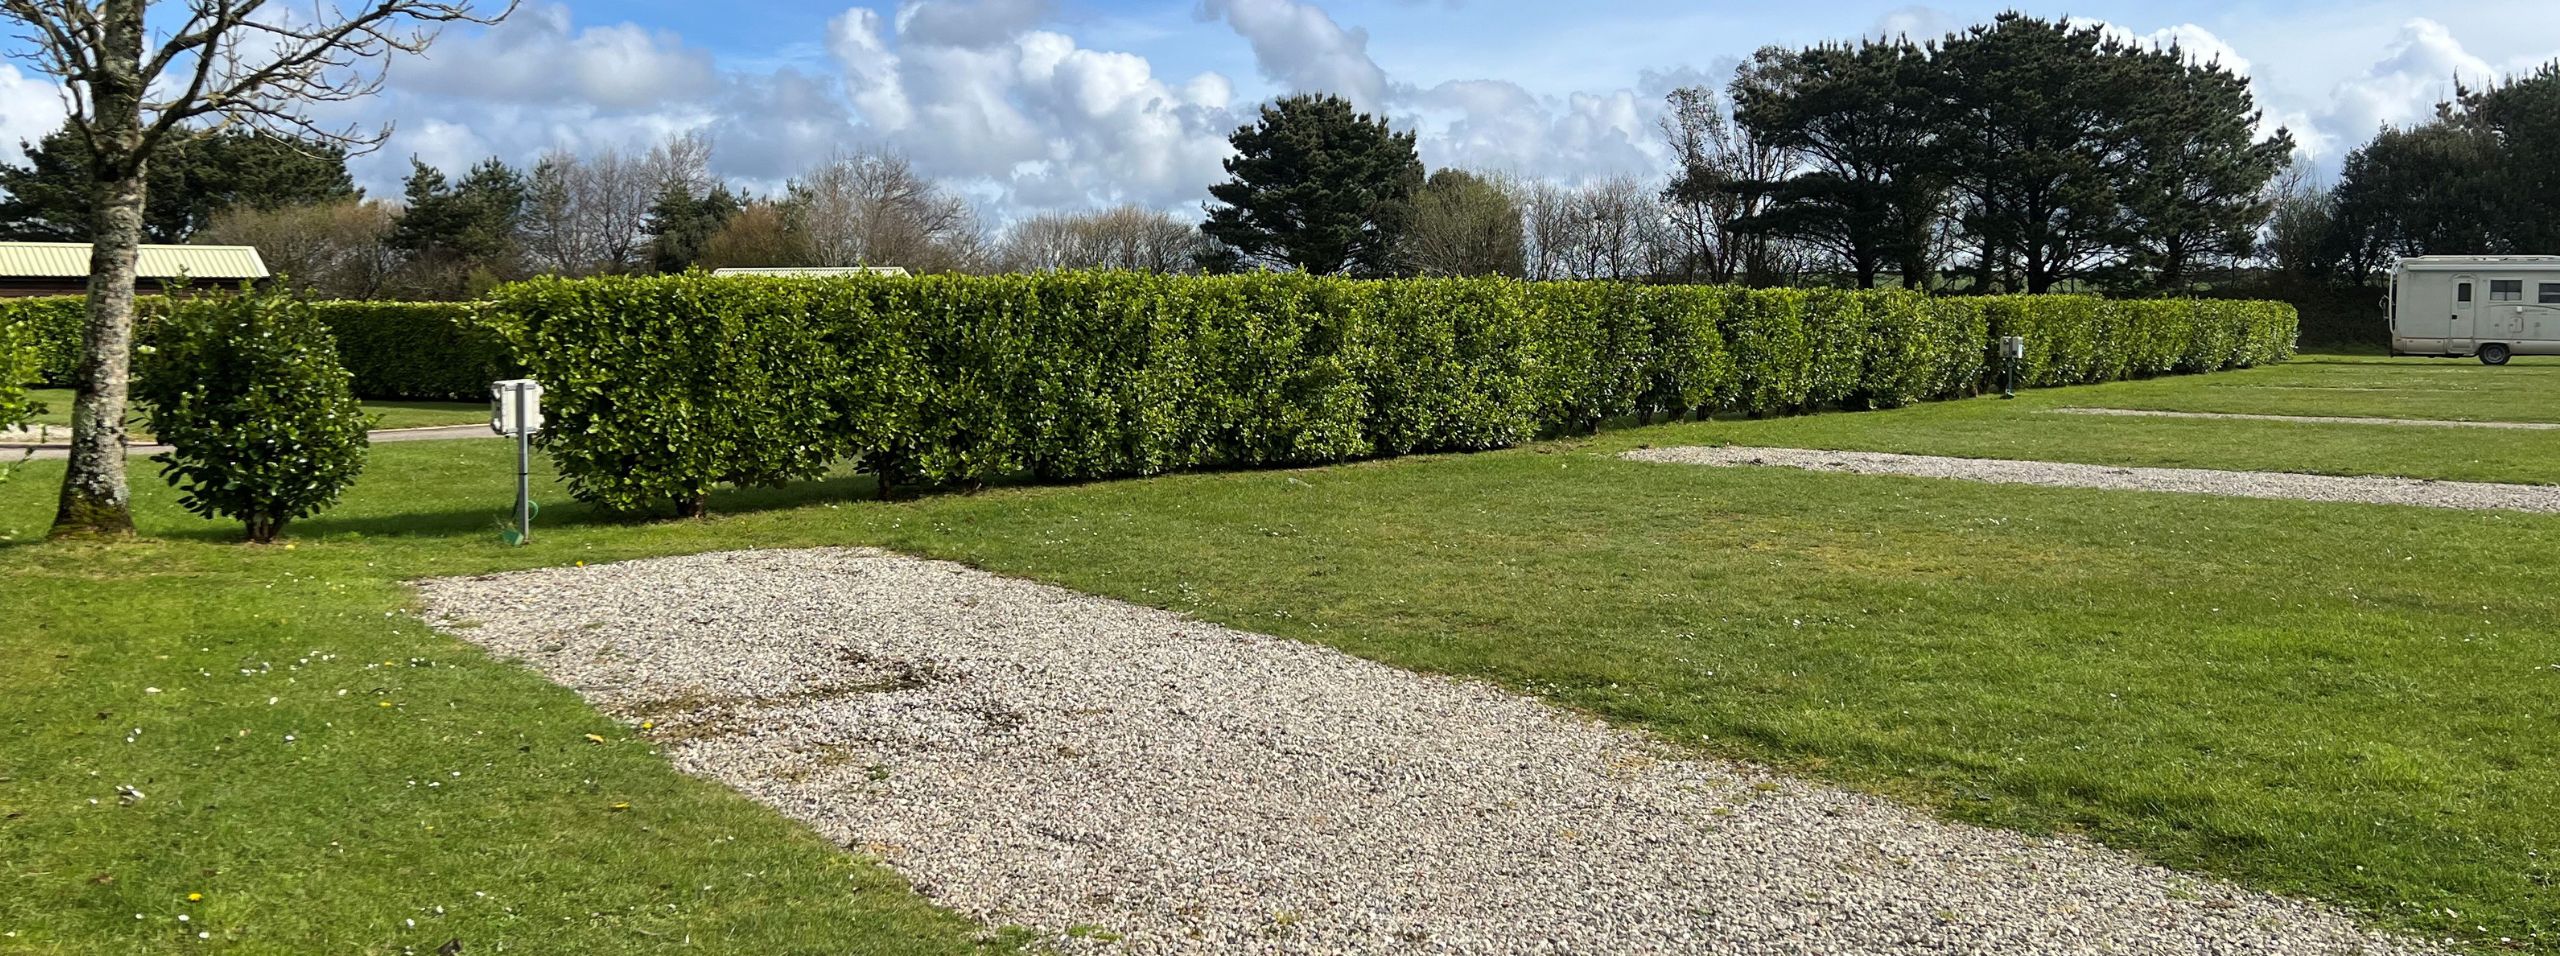 A long, well-trimmed hedge beside a gravel pathway under a clear sky, with open grass areas and a caravan in the distance on the right at a Cornwall campsite.